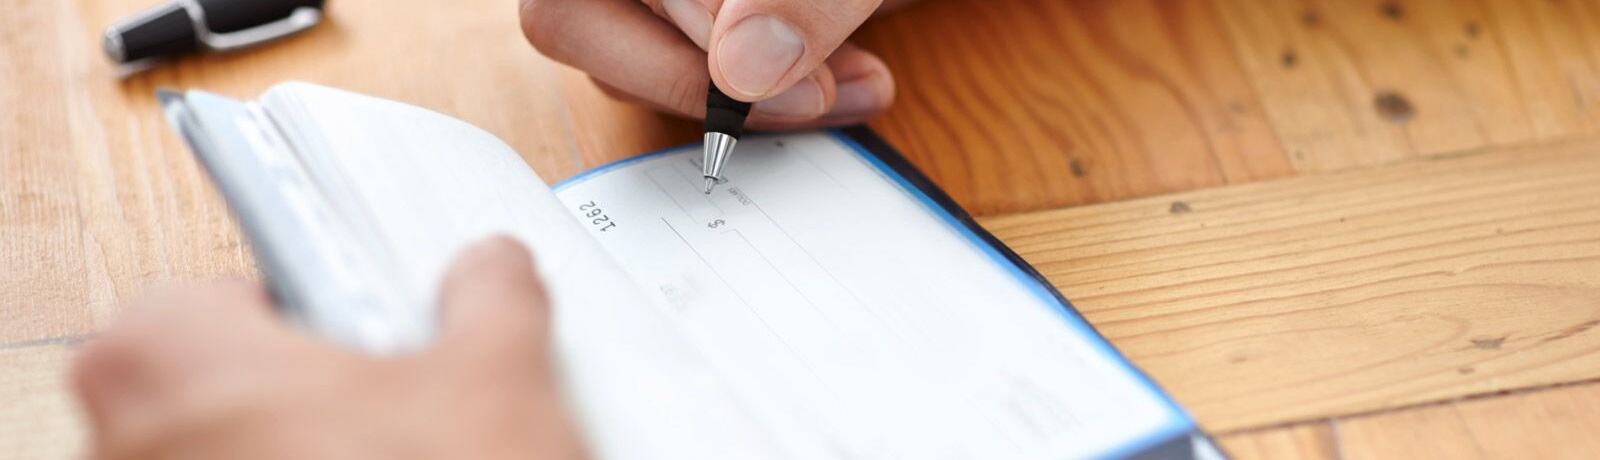 Image of someone writing a check from a check book